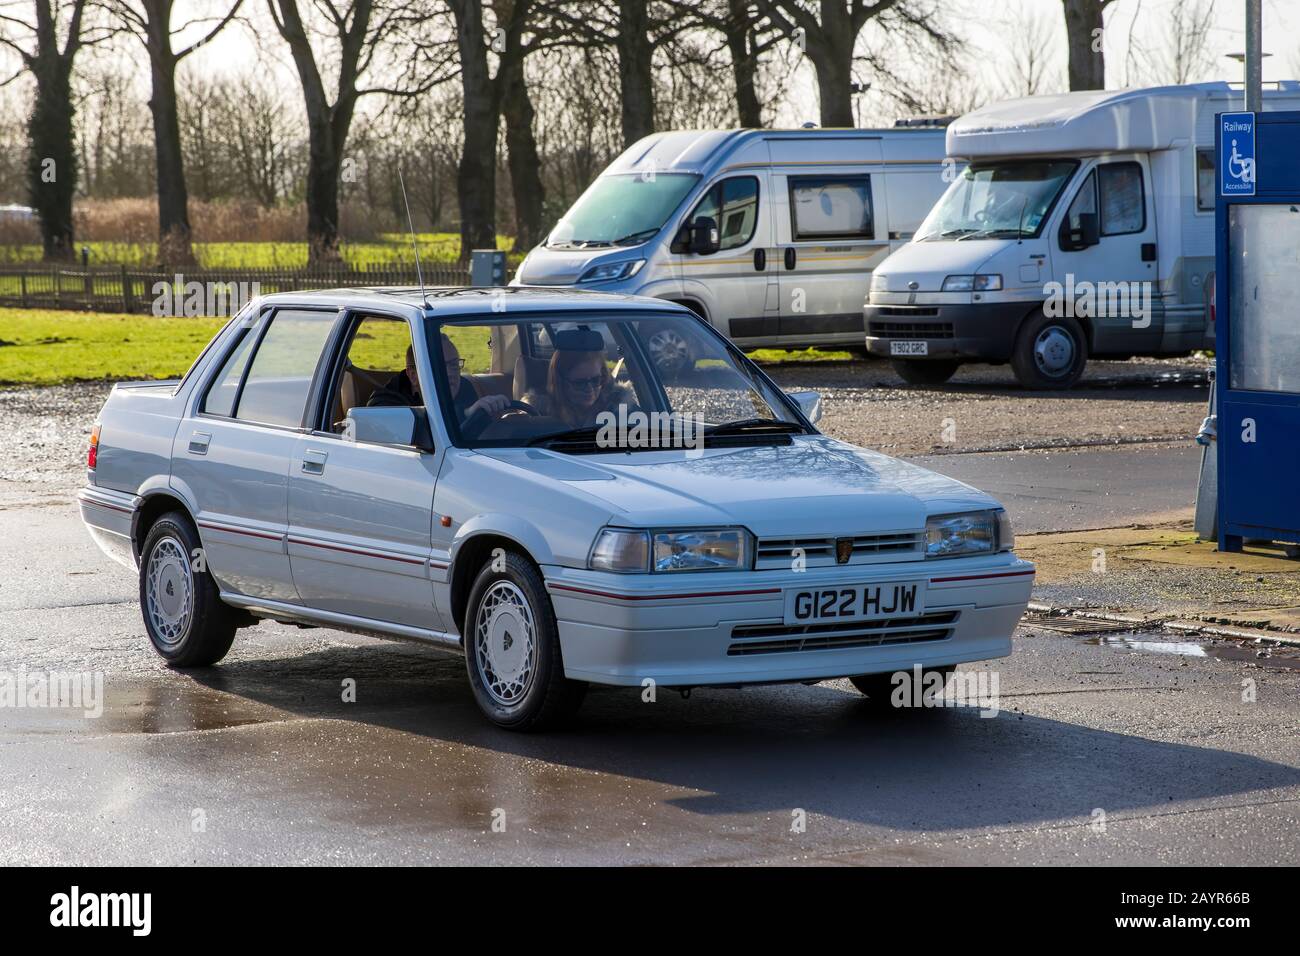 Rover 216 SX, 1990, Reg No: G122 HJW, at The Great Western Classic Car Show, Shepton Mallet UK, Febuary 08, 2020 Stock Photo